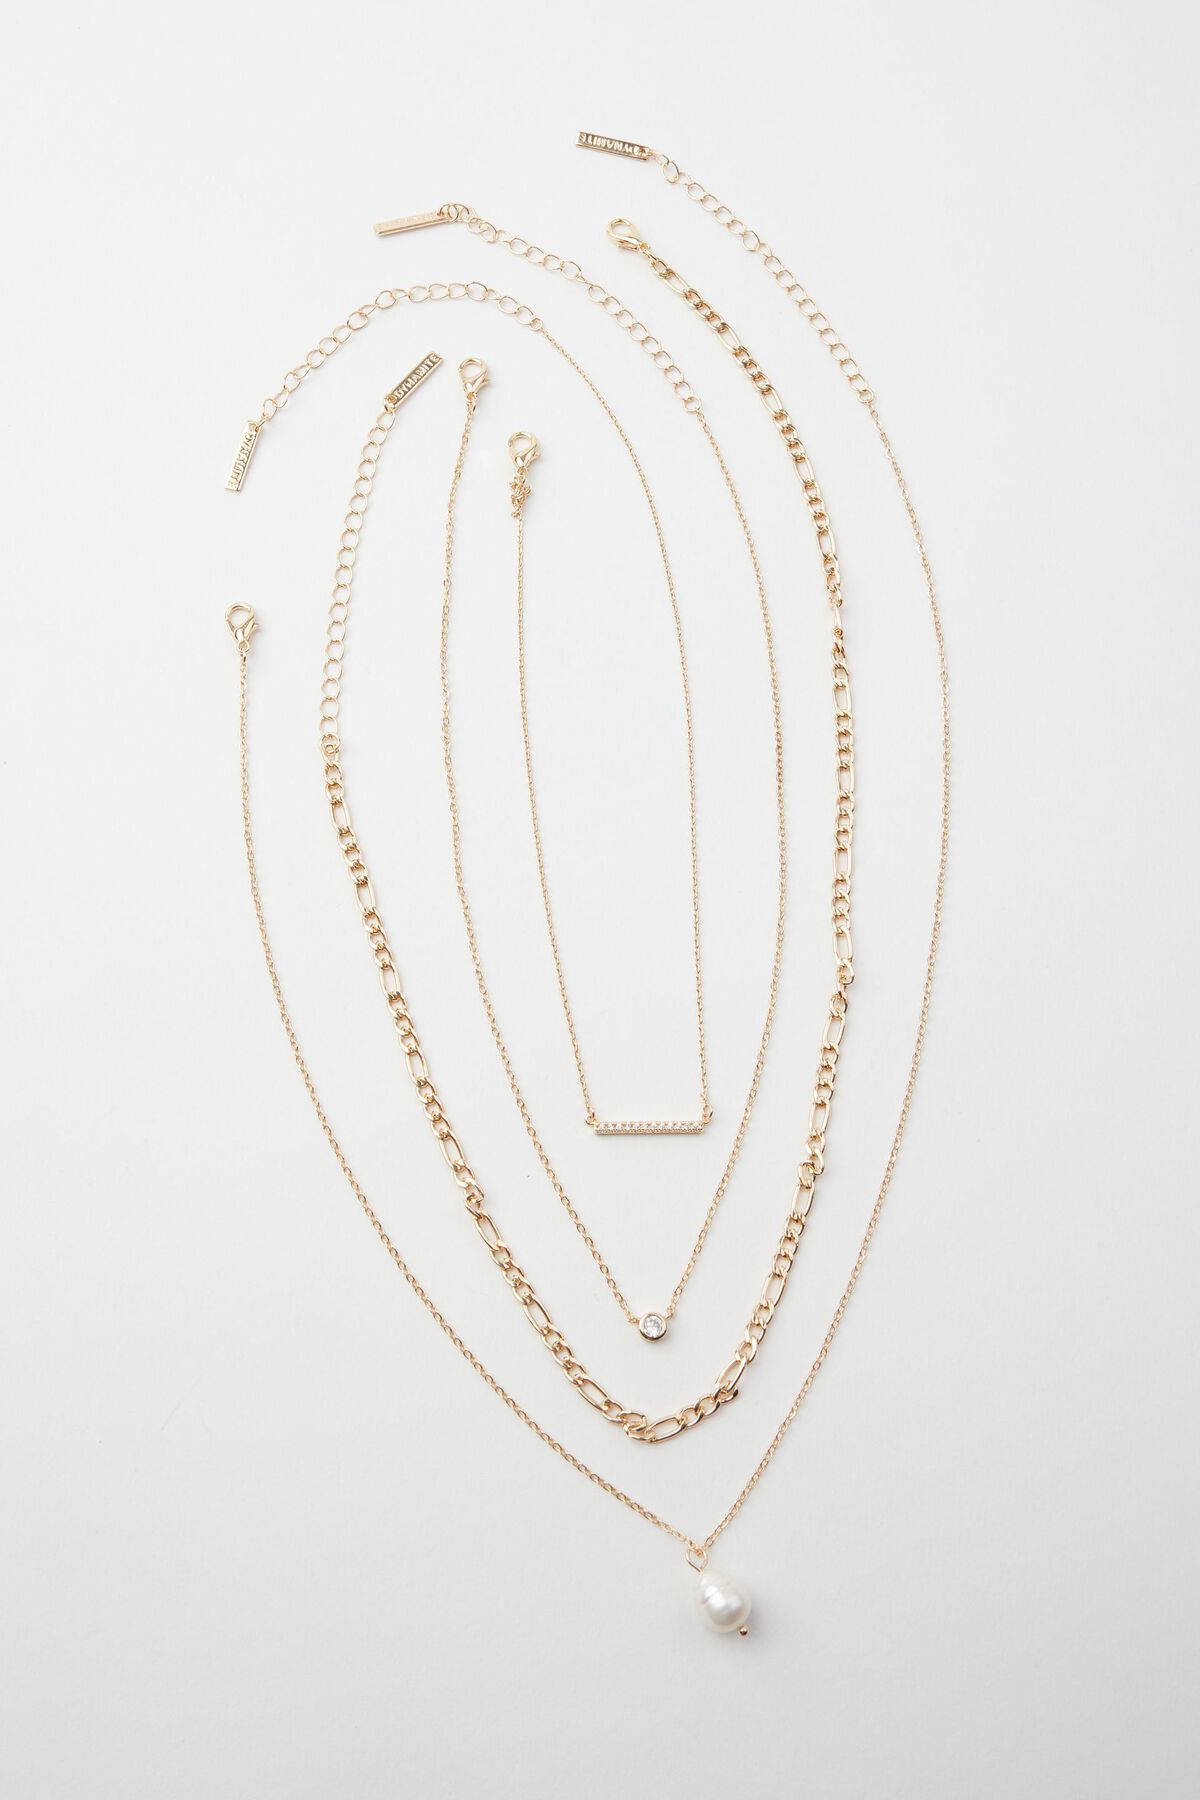 Dynamite Layered Gem & Pearl Chain Necklace. 4